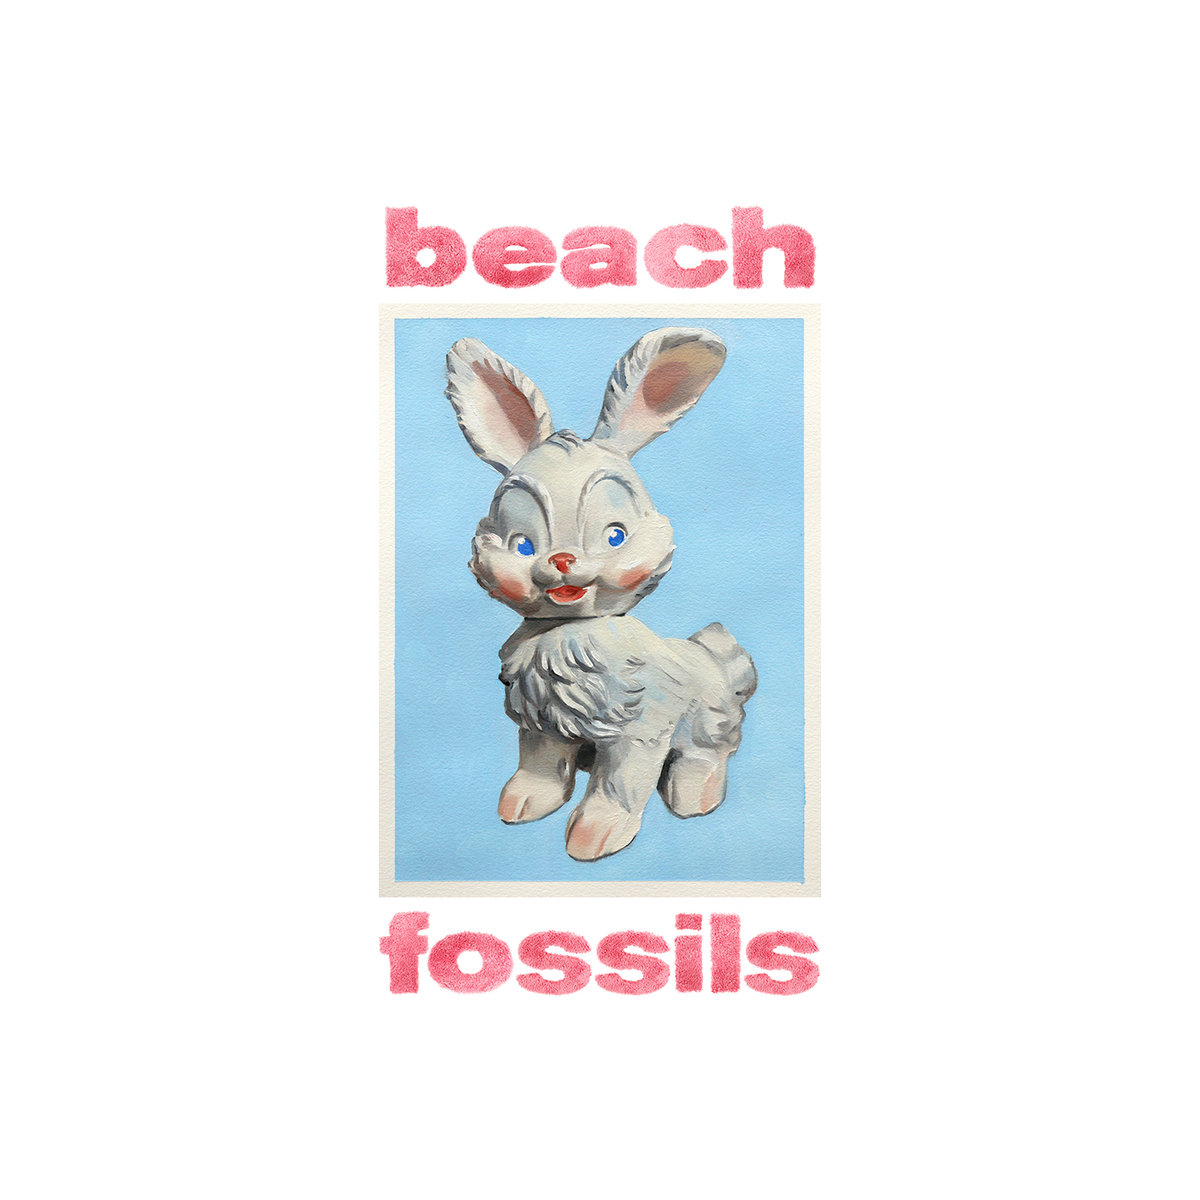 Single of the week – Beach Fossils – Dare Me